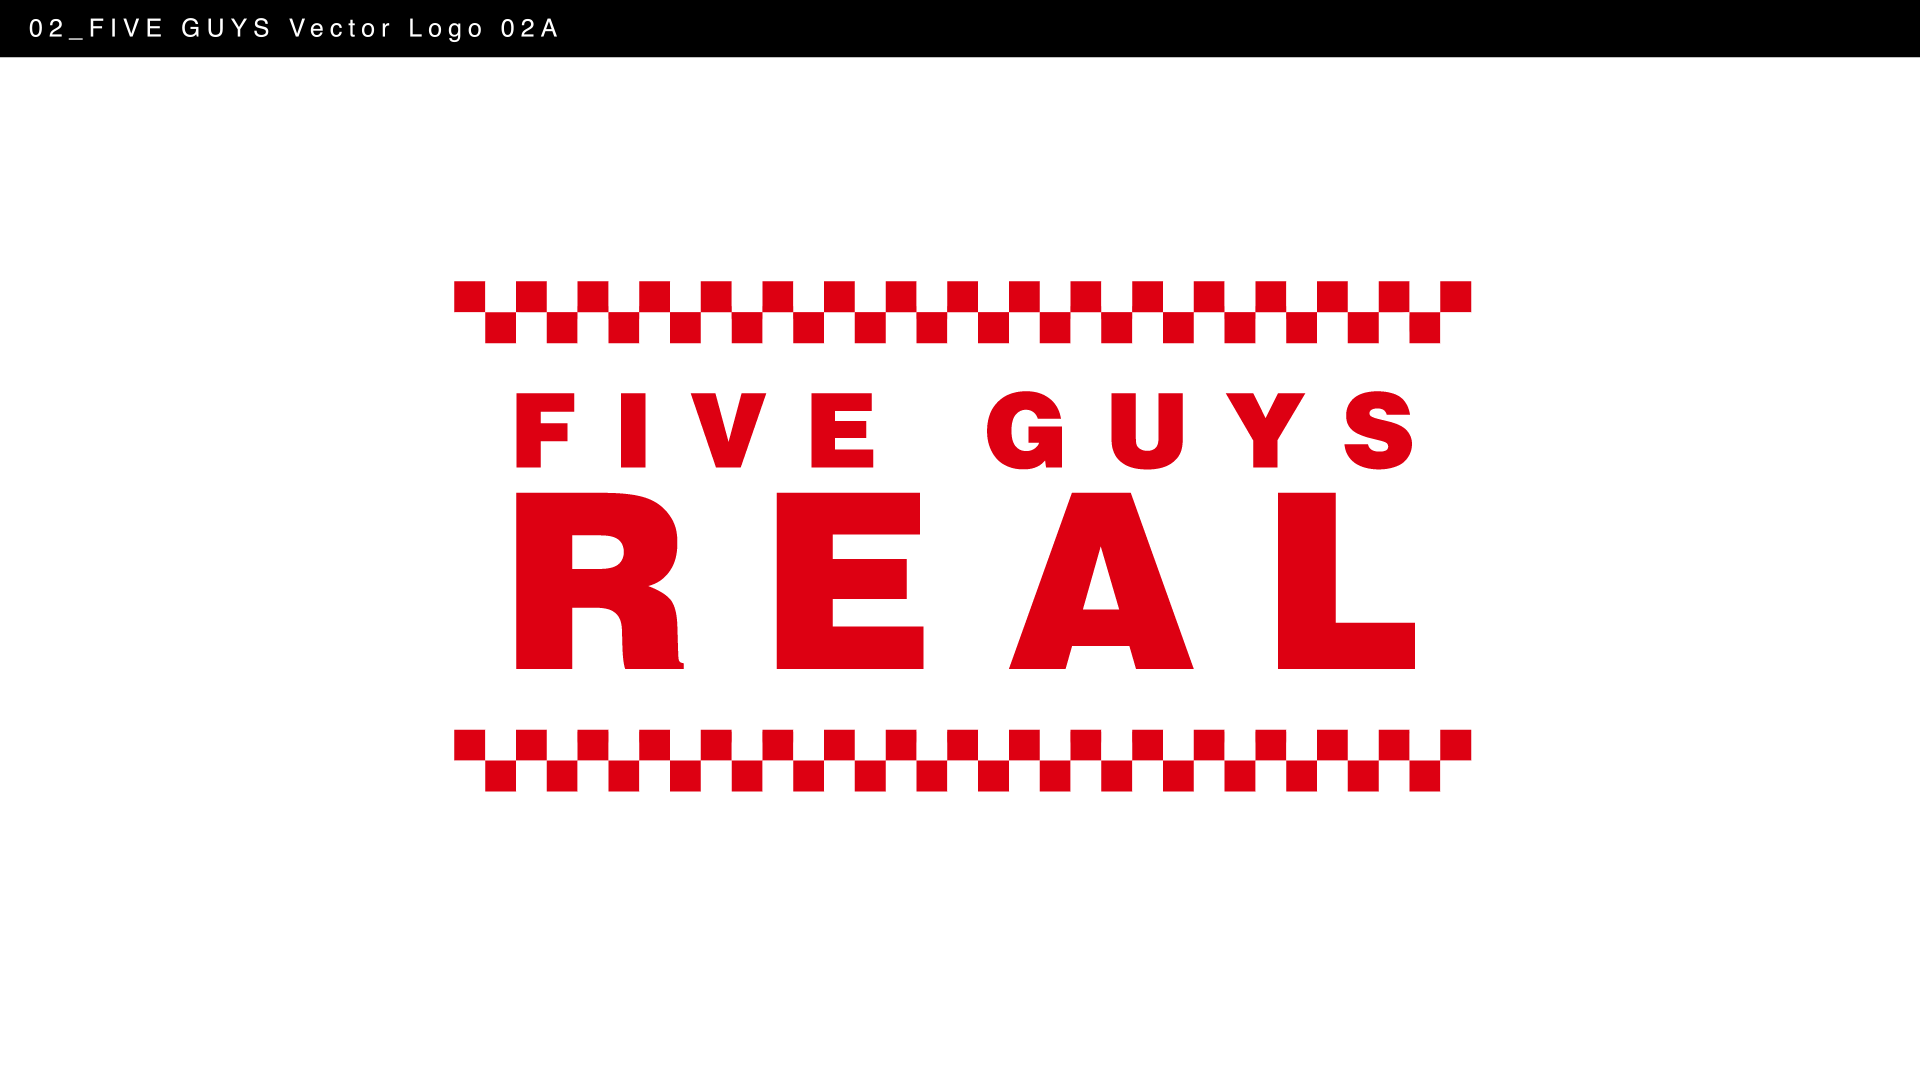 Only real guys.com